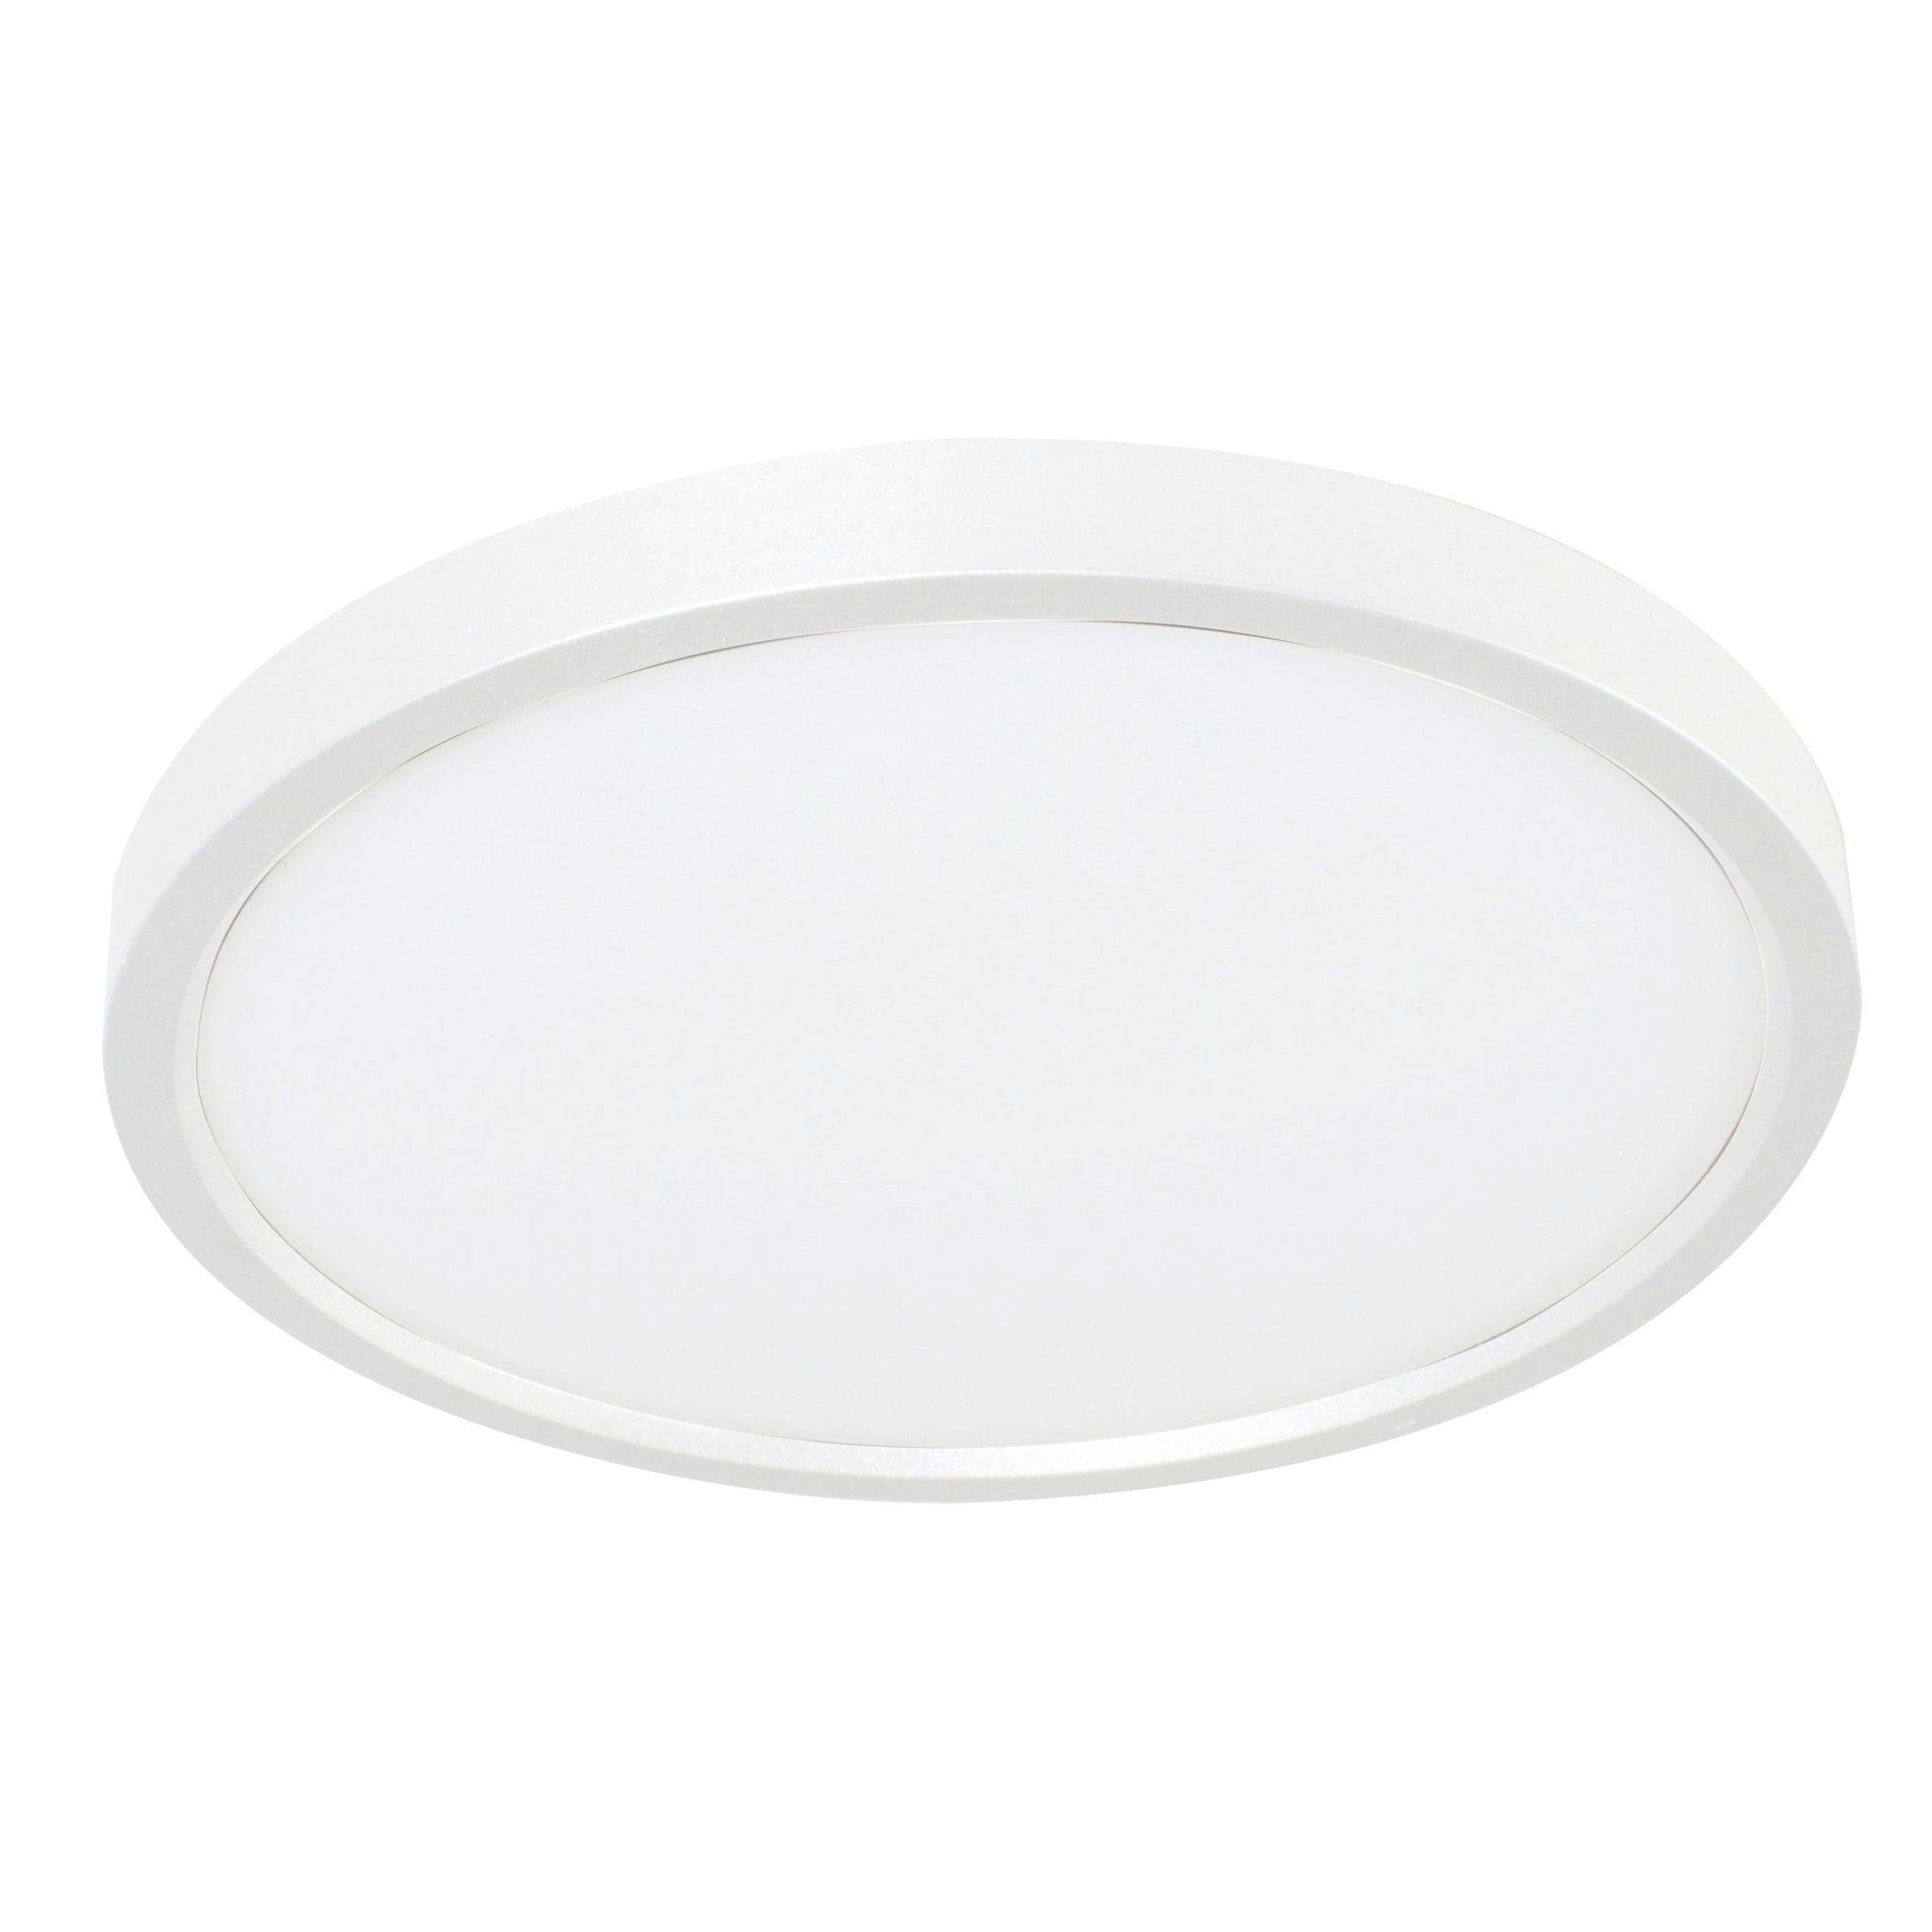 Satin Nickel 6" Round LED Flush Mount with Frosted Acrylic Shade